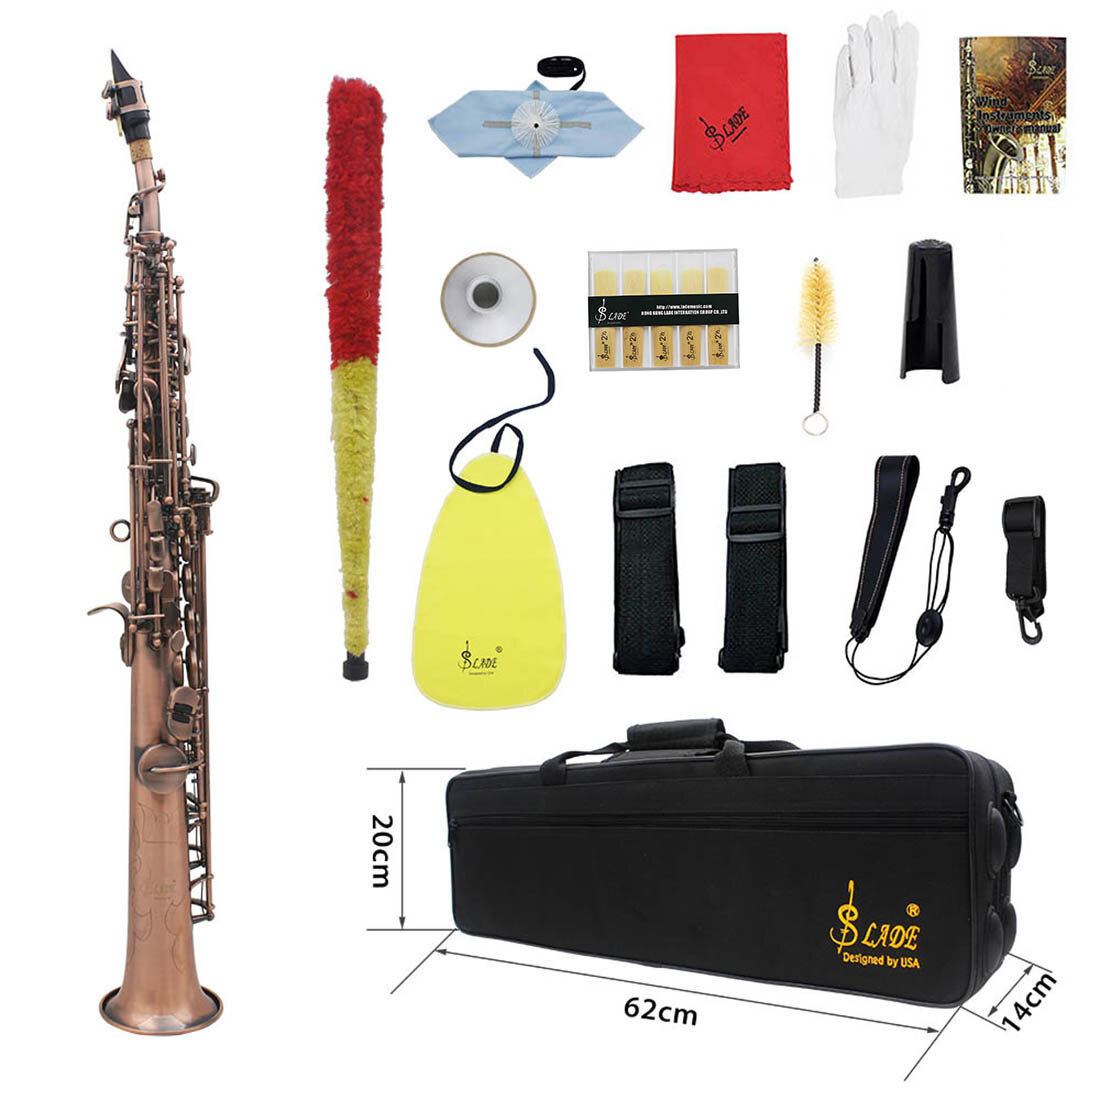 SLADE Red Bronze Straight Bb Soprano Saxophone Sax Woodwind Instrument Abalone Shell Key Carve Patte